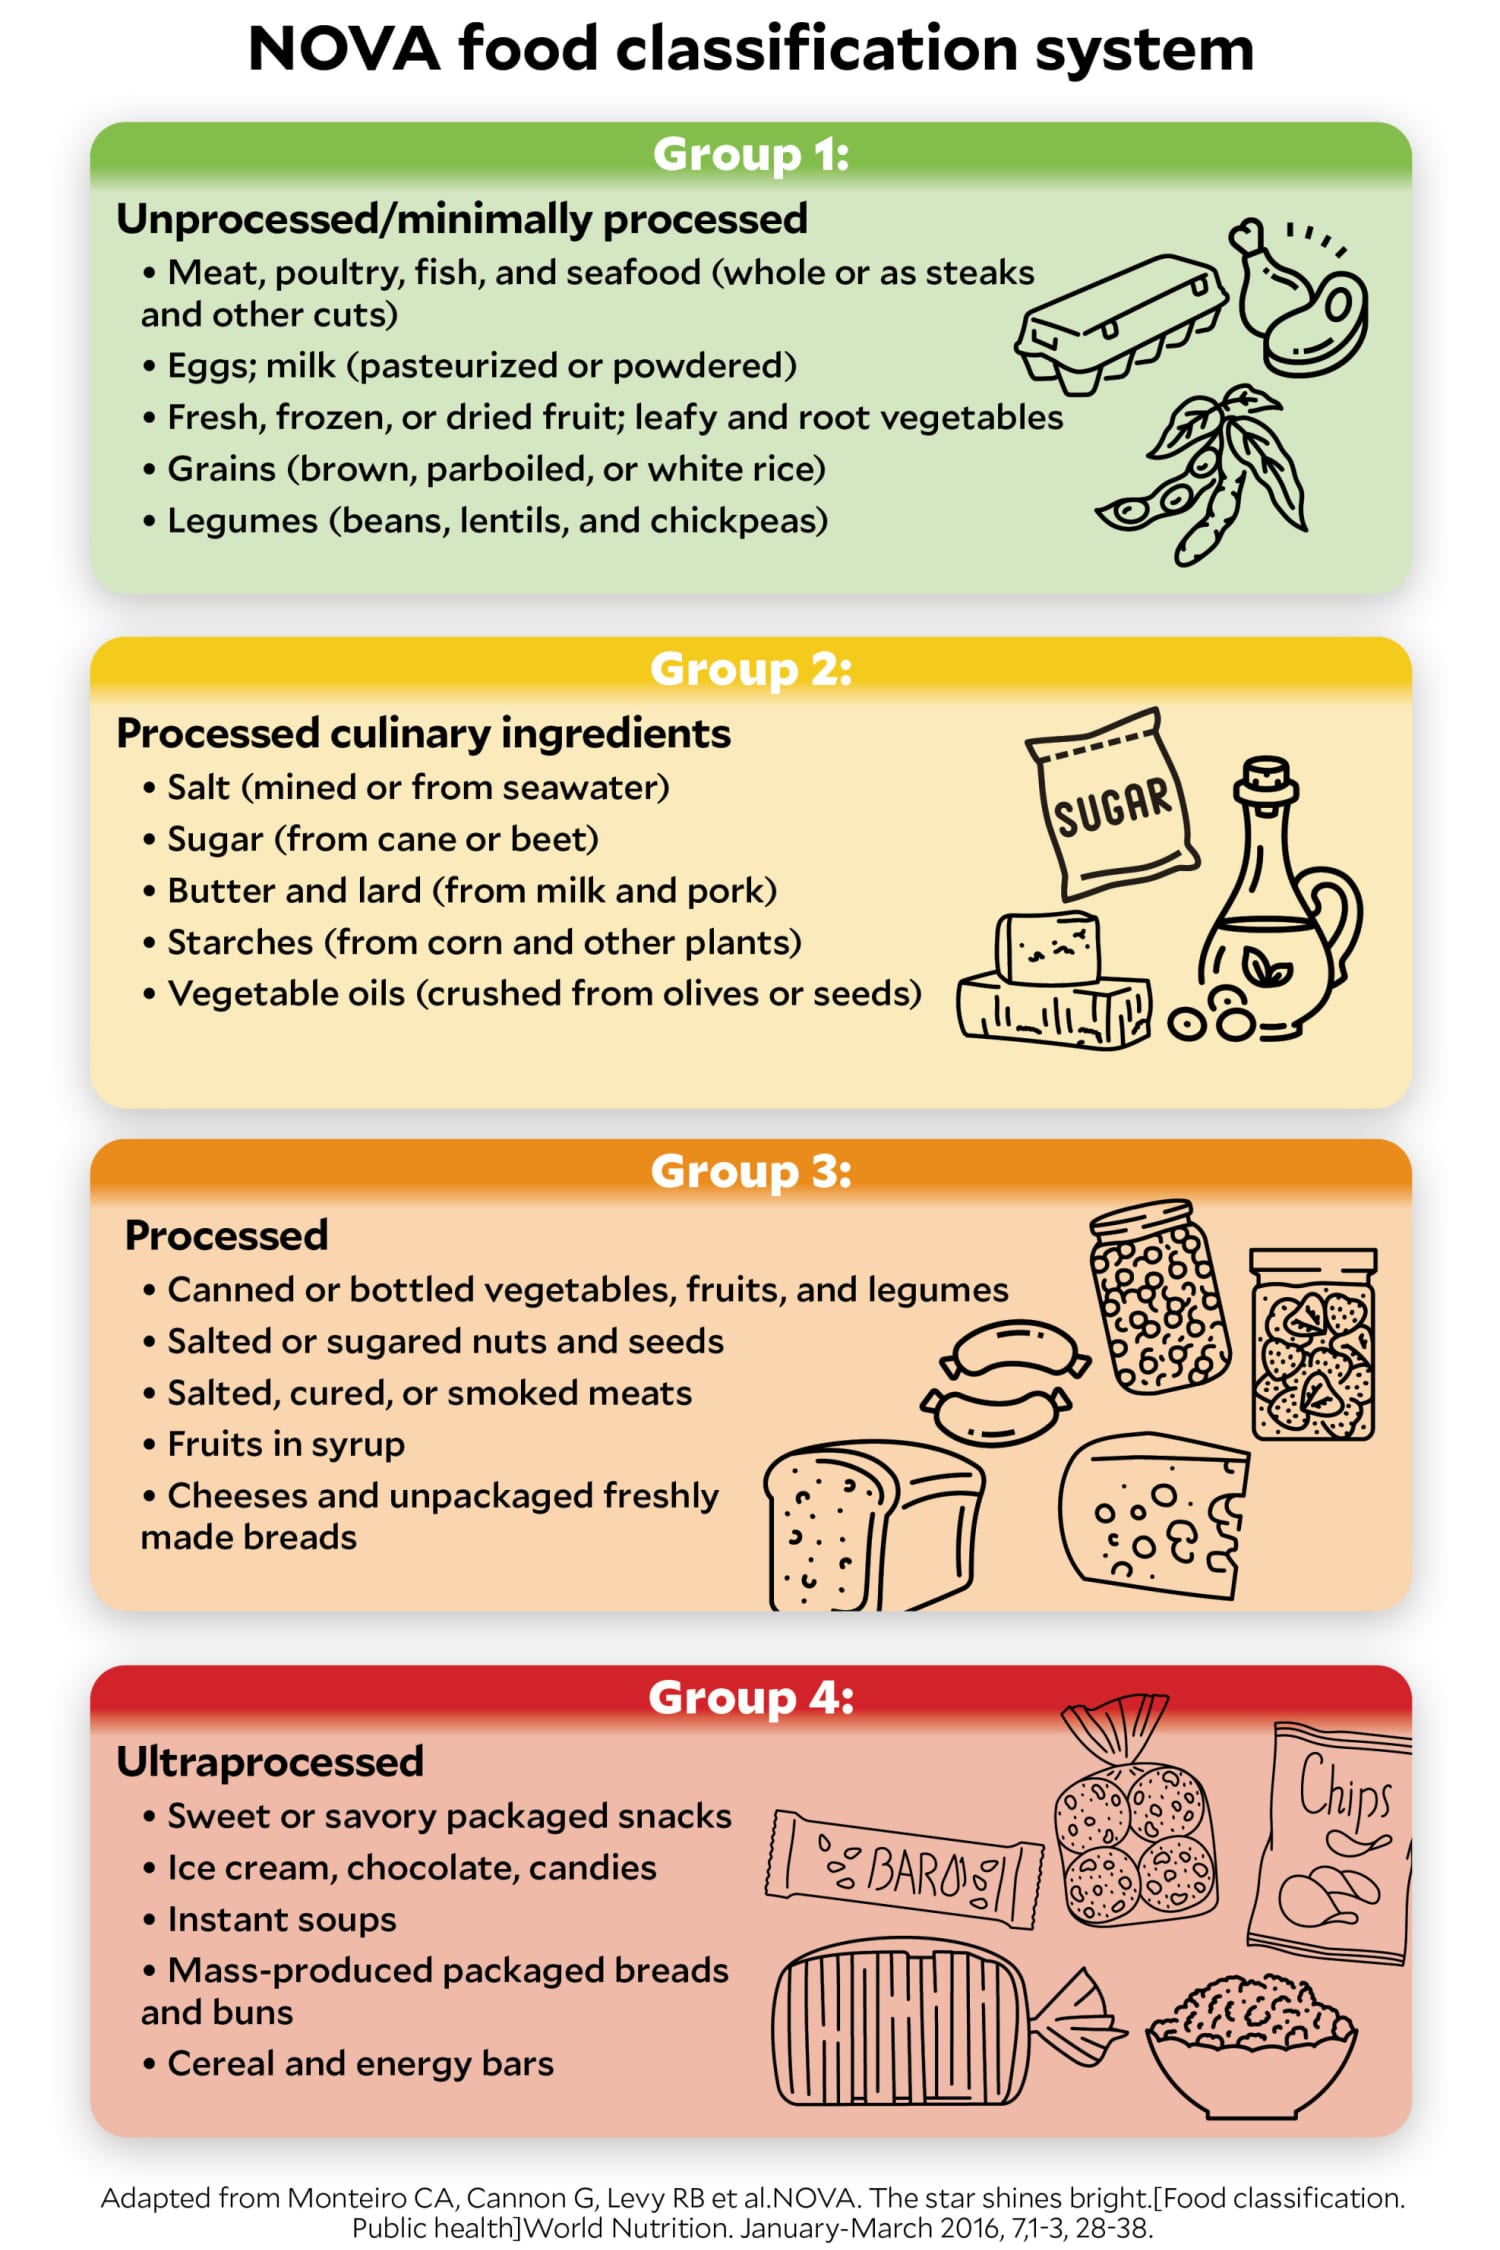 illustration of NOVA classification system for ultraprocessed foods